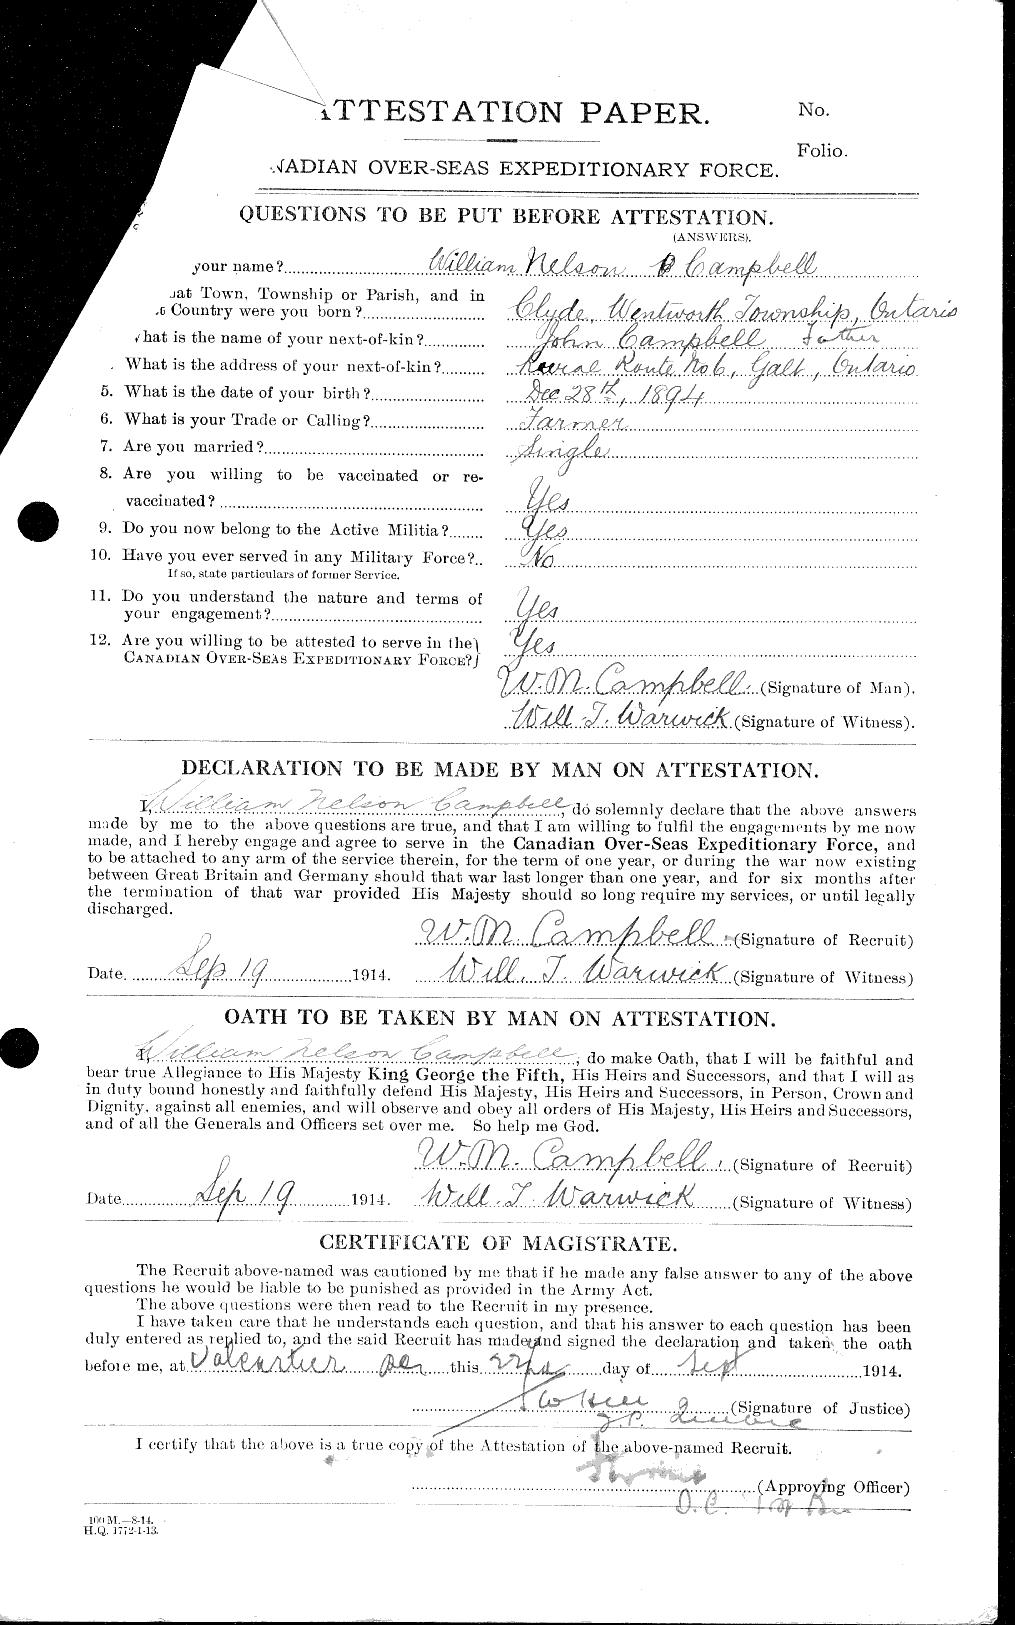 Personnel Records of the First World War - CEF 007068a